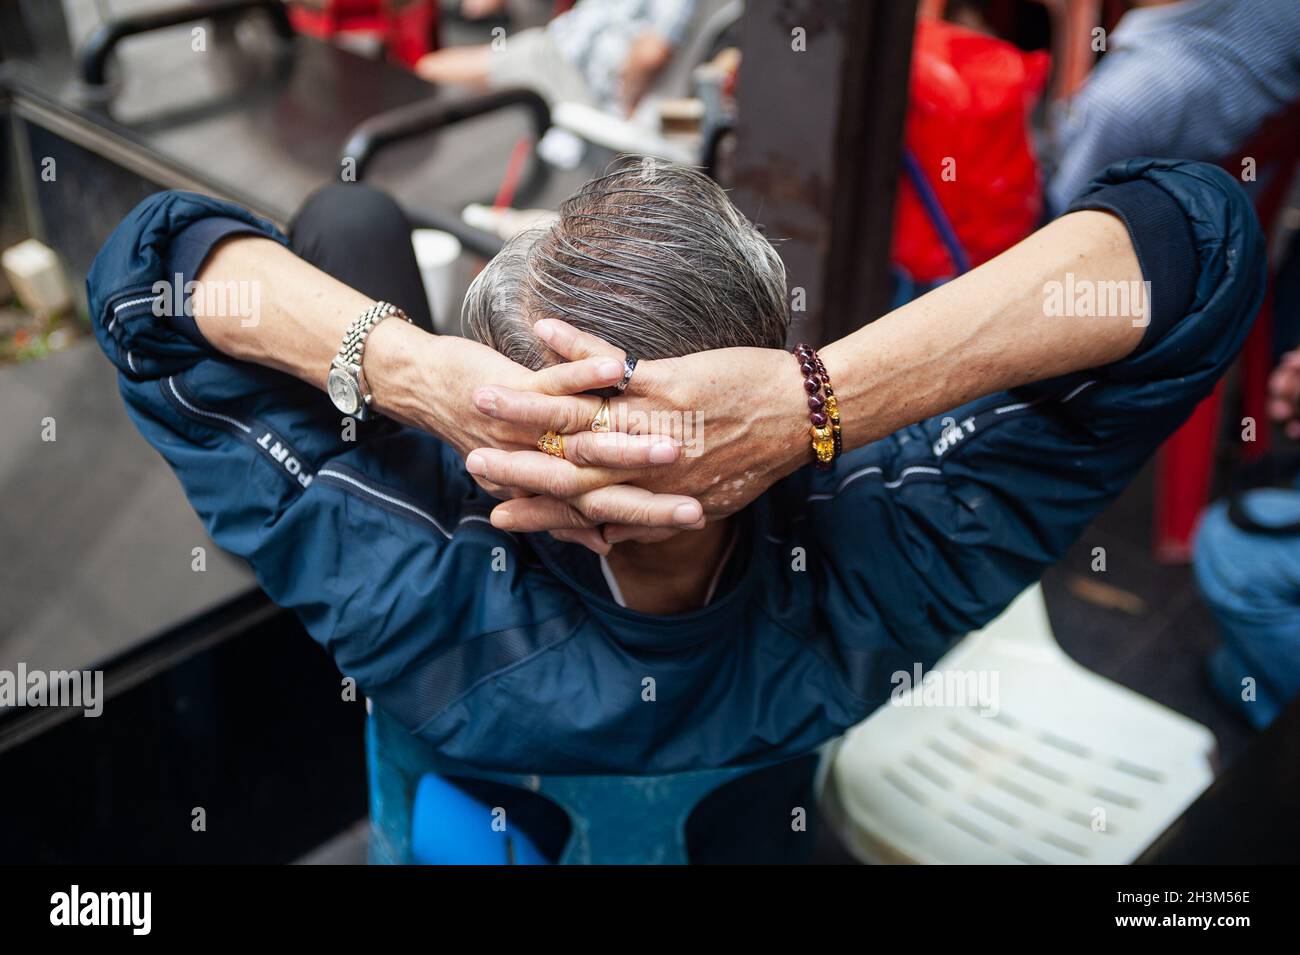 24.02.2019, Singapore, Republic of Singapore, Asia - Close-up shot depicts the interlocked hands behind the head of an elderly man in Chinatown. Stock Photo